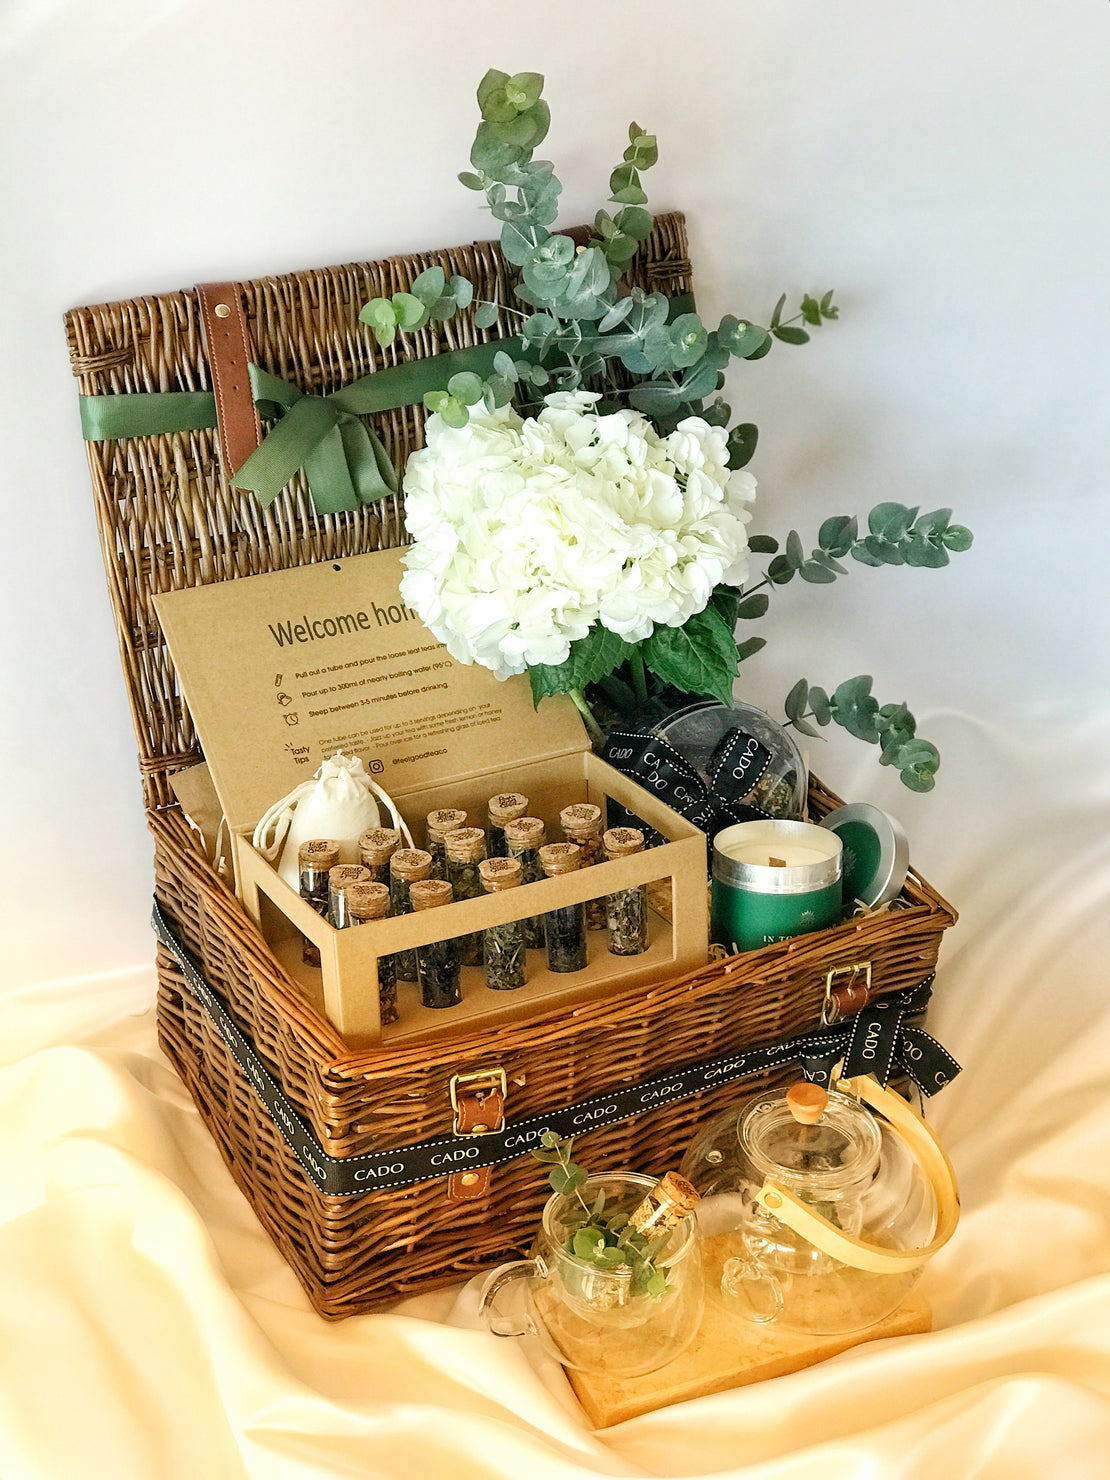 The Welcome Home Hamper